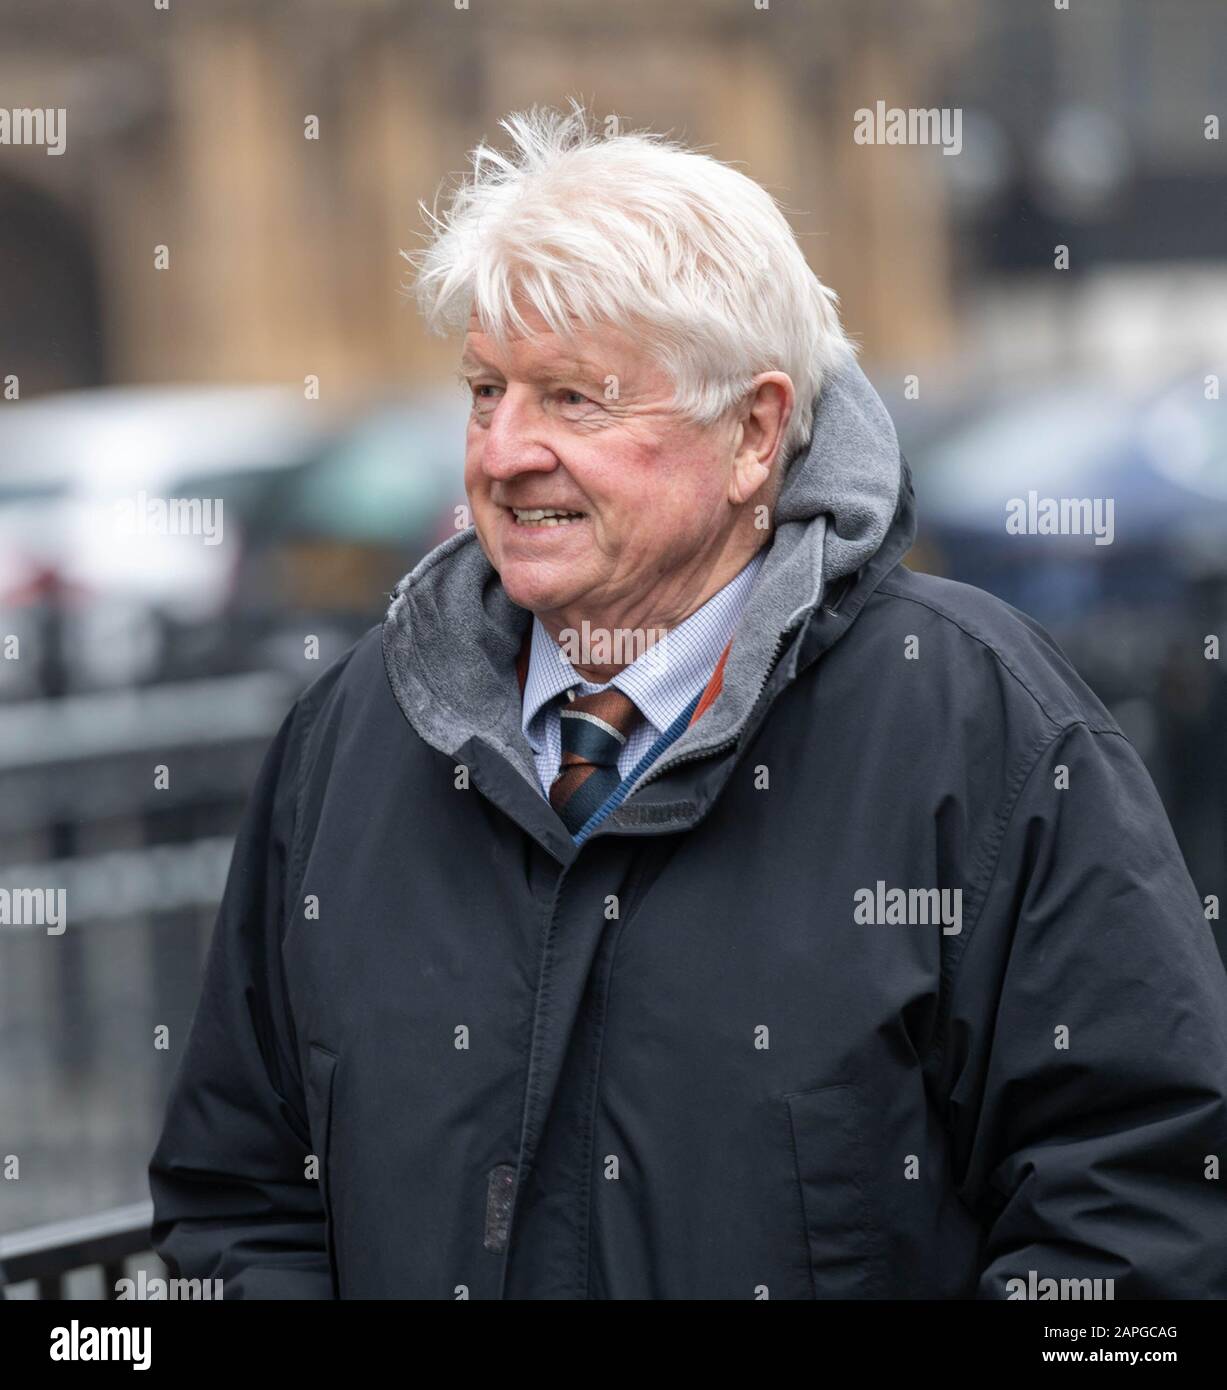 London 22nd Jan. 2020 Stanley Johnson, Father of Boris Johnson MP PC Prime Minister arrives at Parliament for Prime Ministers Questions Credit: Ian Davidson/Alamy Live News Stock Photo